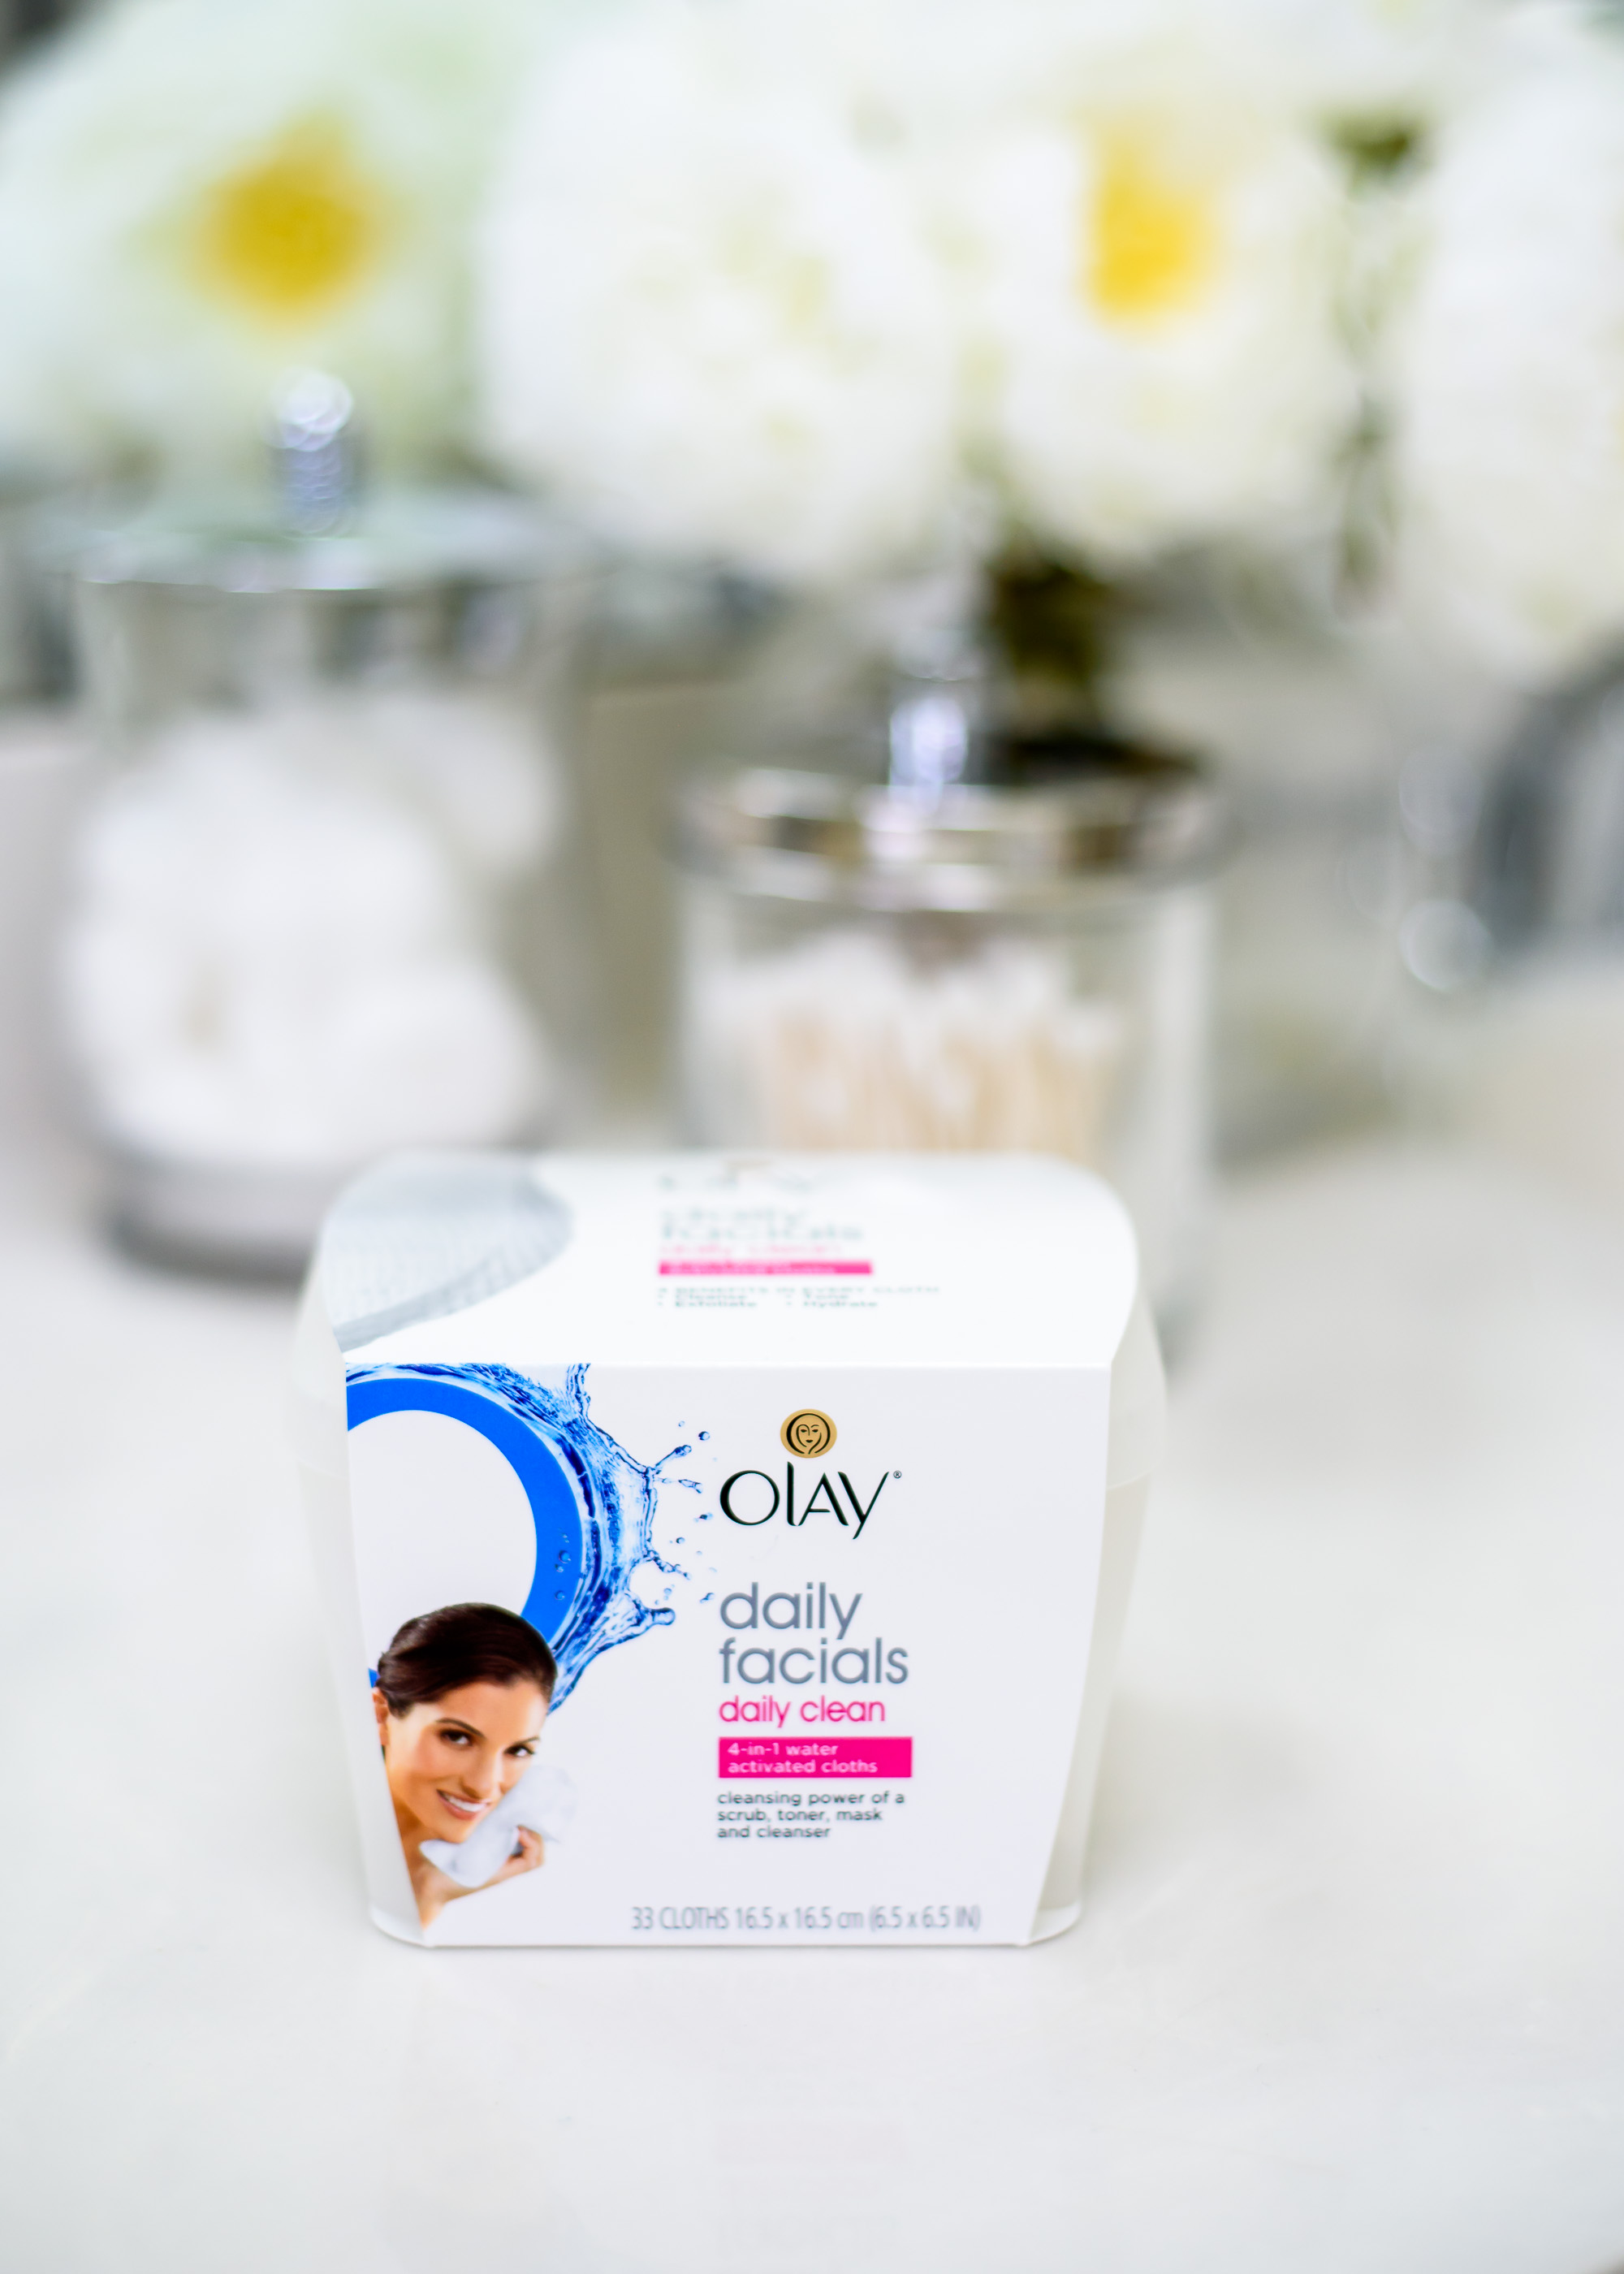 The new Olay Daily Facials cleansing cloths combine cleansing, toning, exfoliating and a hydrating mask for a ground breaking 4-in-1 makeup remover! 